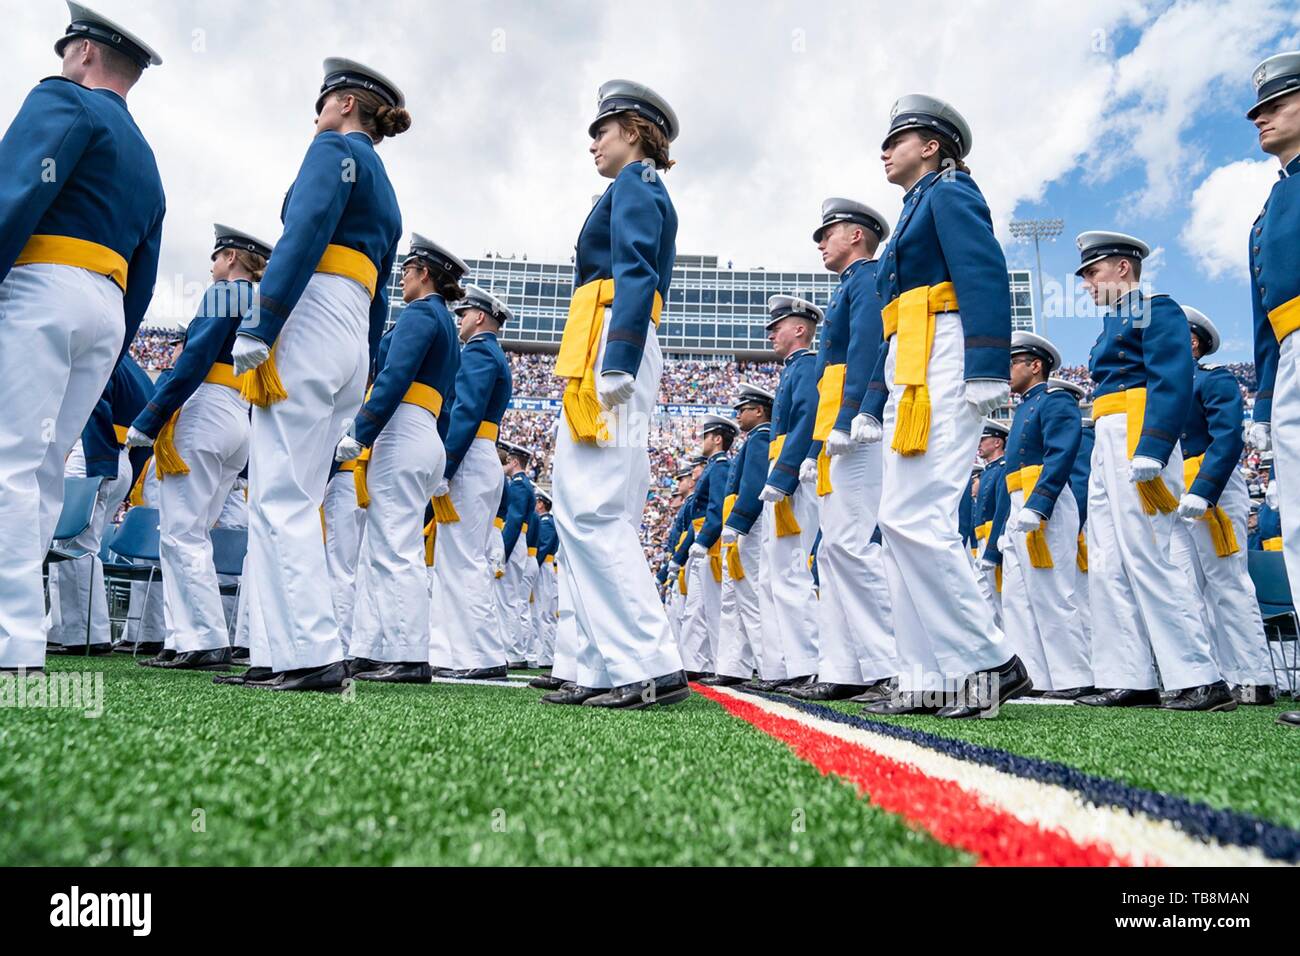 Colorado Springs, Colorado, USA. 30th May, 2019. U.S Air Force Academy cadets march into the stadium during the Graduation Ceremony at the USAF Academy Falcon Stadium May 30, 2019 in Colorado Springs, Colorado. Credit: Planetpix/Alamy Live News Stock Photo